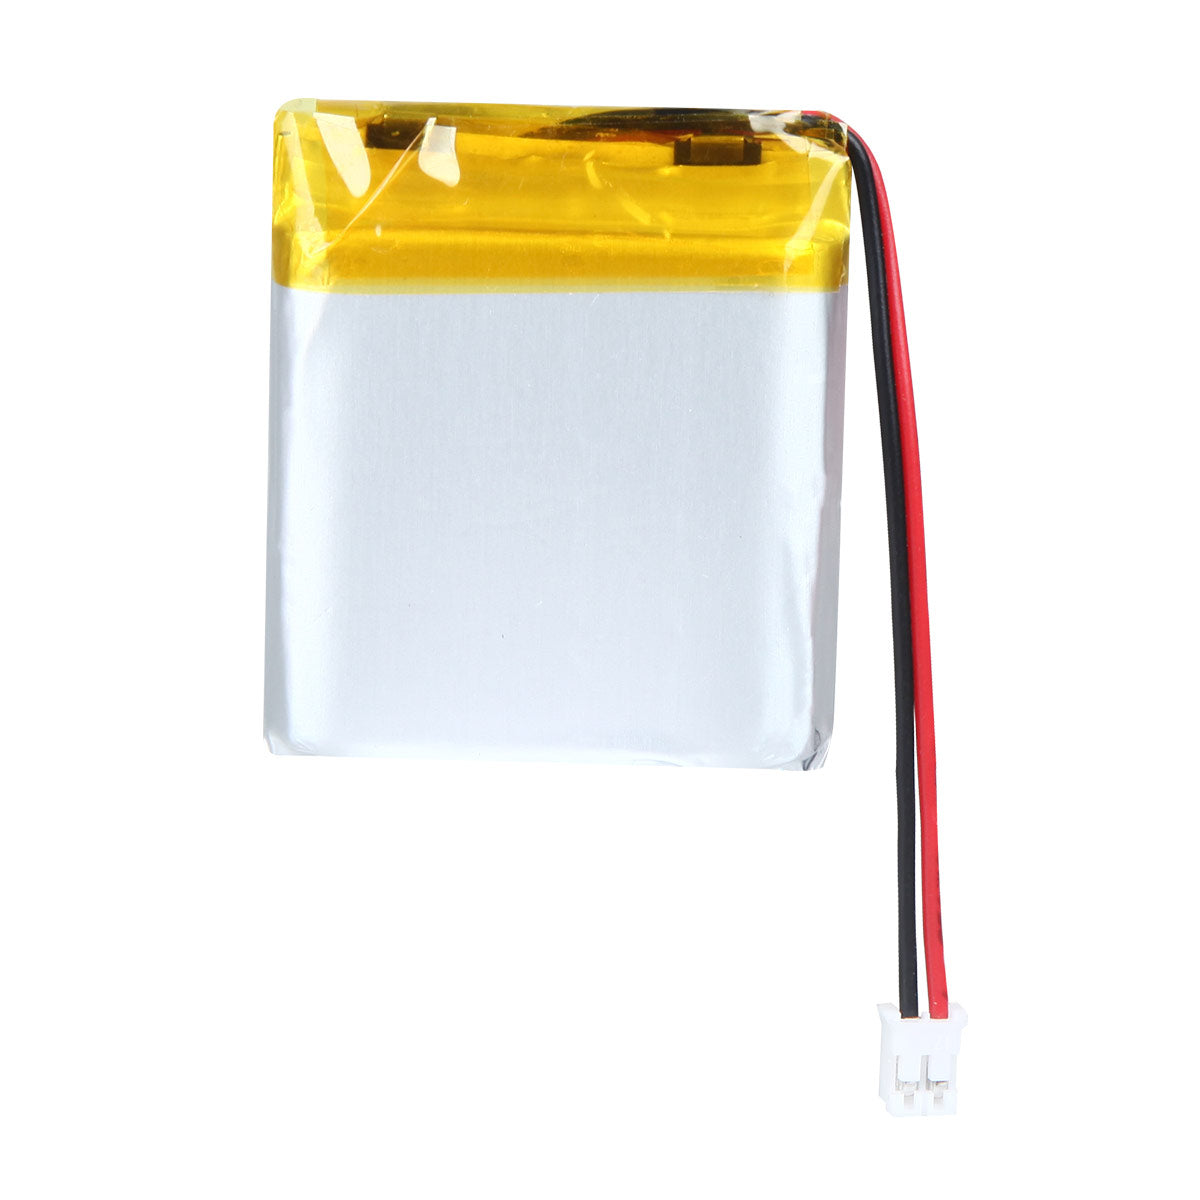 YDL 3.7V 1400mAh 883440 Rechargeable Lithium Polymer Battery